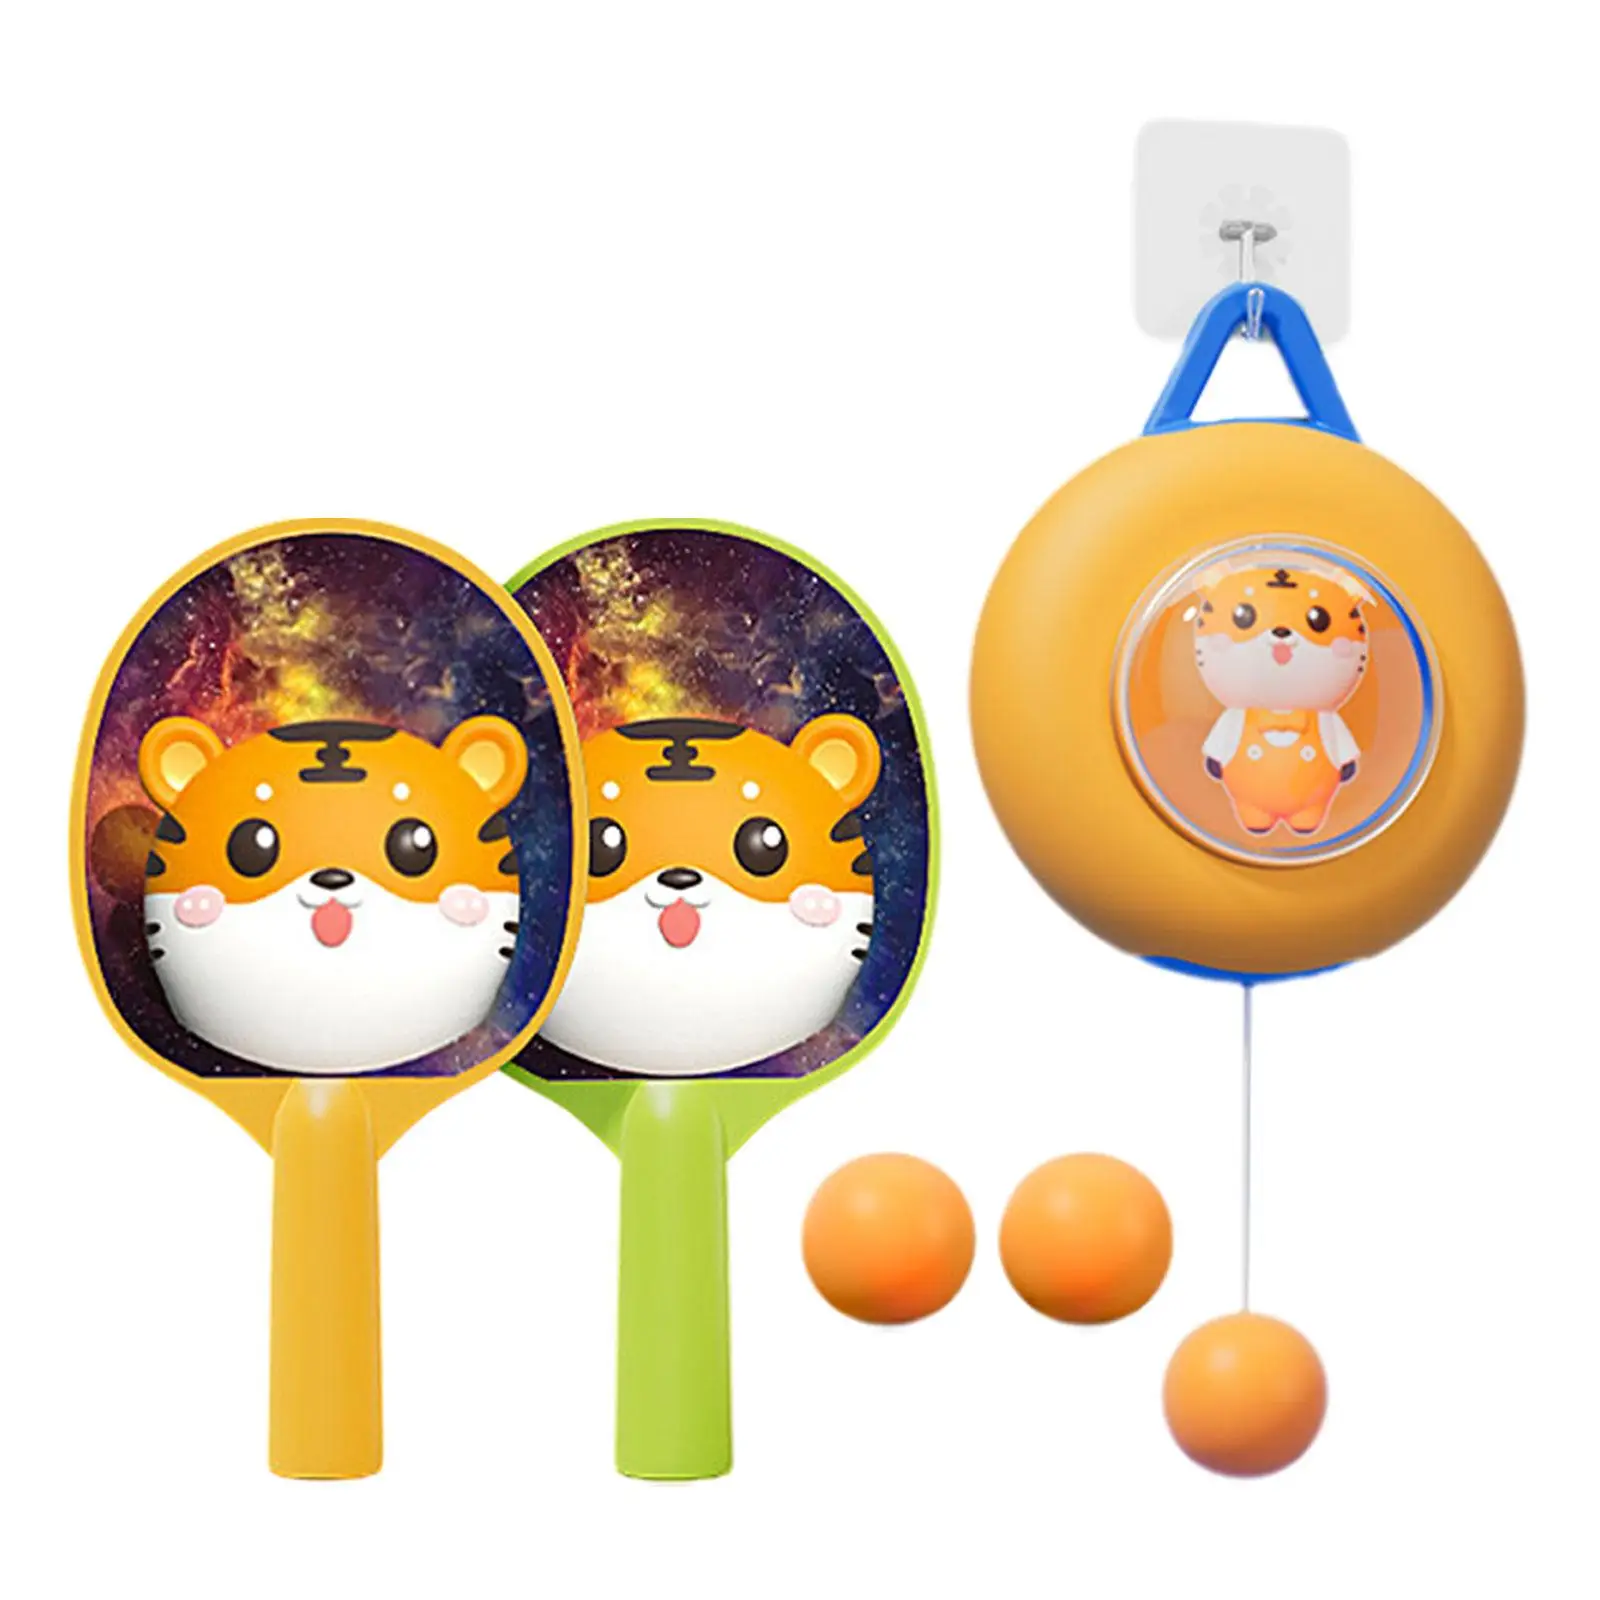 Tennis Trainer Self Training Set Workout Equipment with Sticky Hook Telescopic Host Pingpong Balls Paddles Set for Beginners